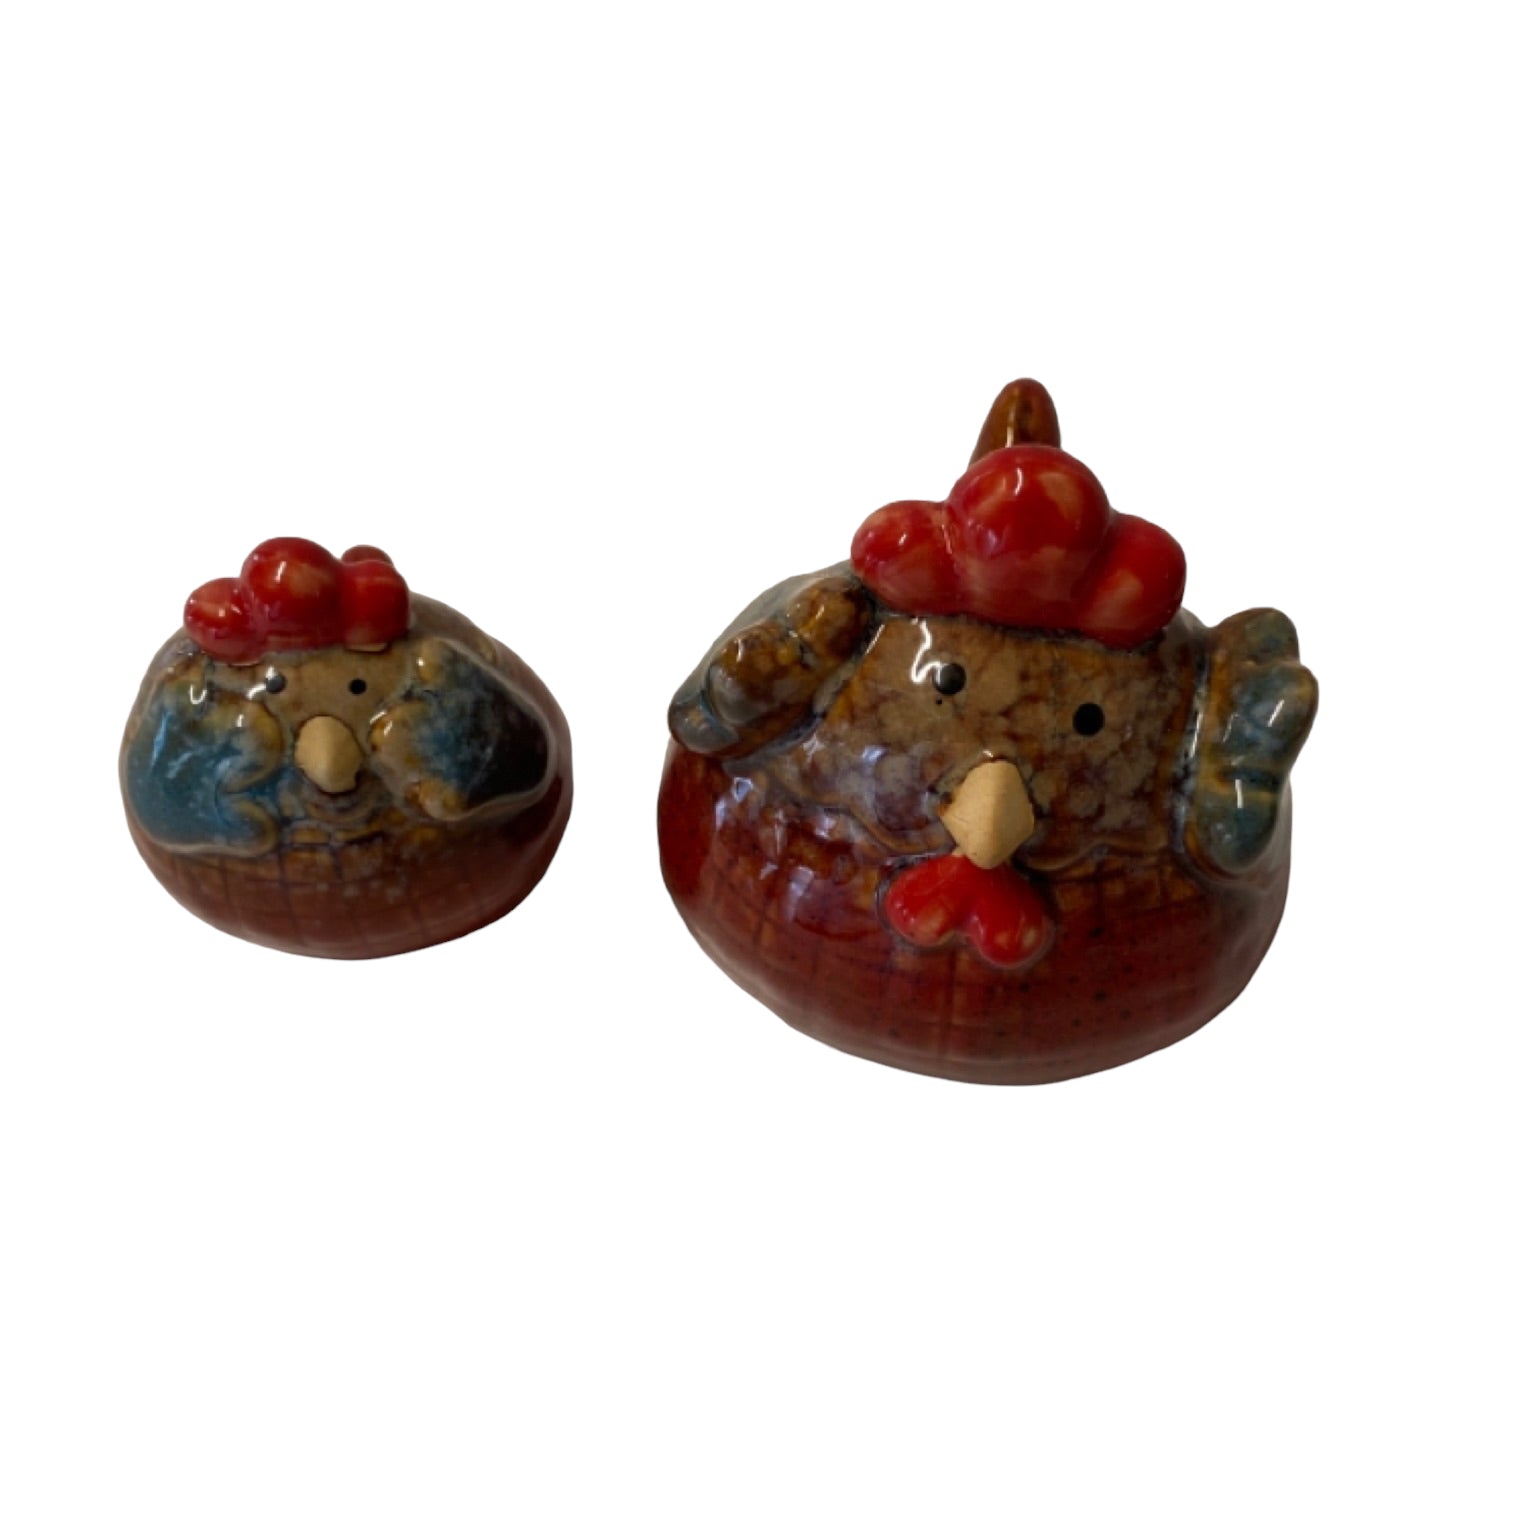 Chicken Rooster Set of 2 Tartan Ornament - The Renmy Store Homewares & Gifts 